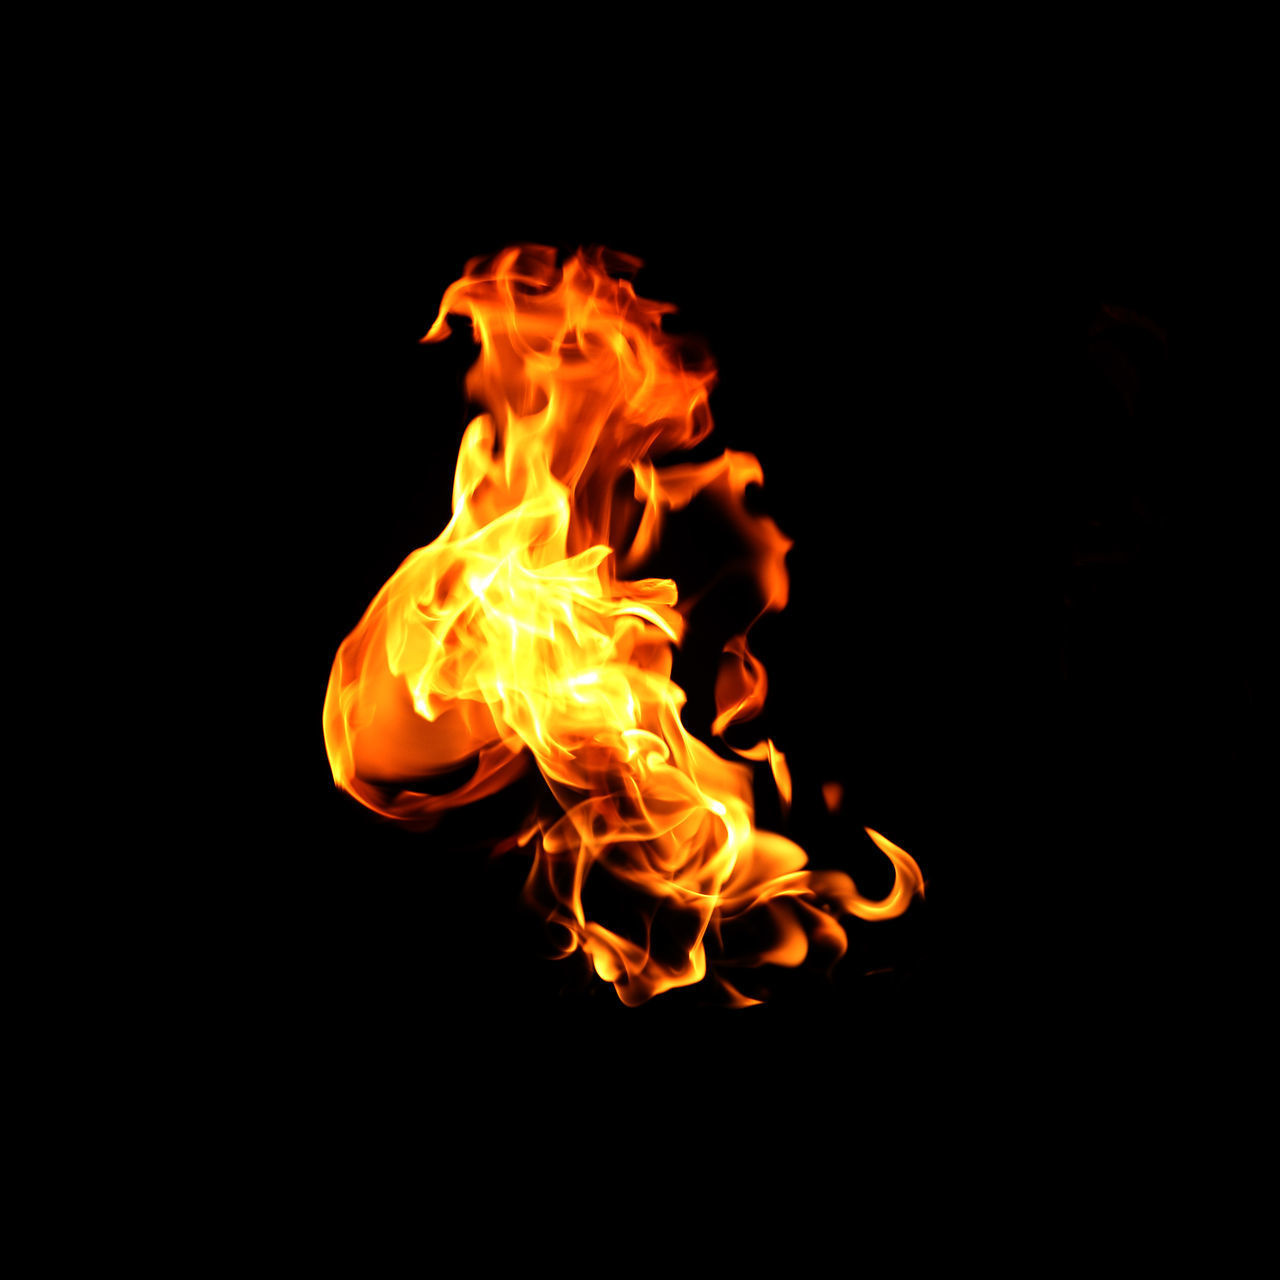 CLOSE-UP OF FIRE BURNING AGAINST BLACK BACKGROUND